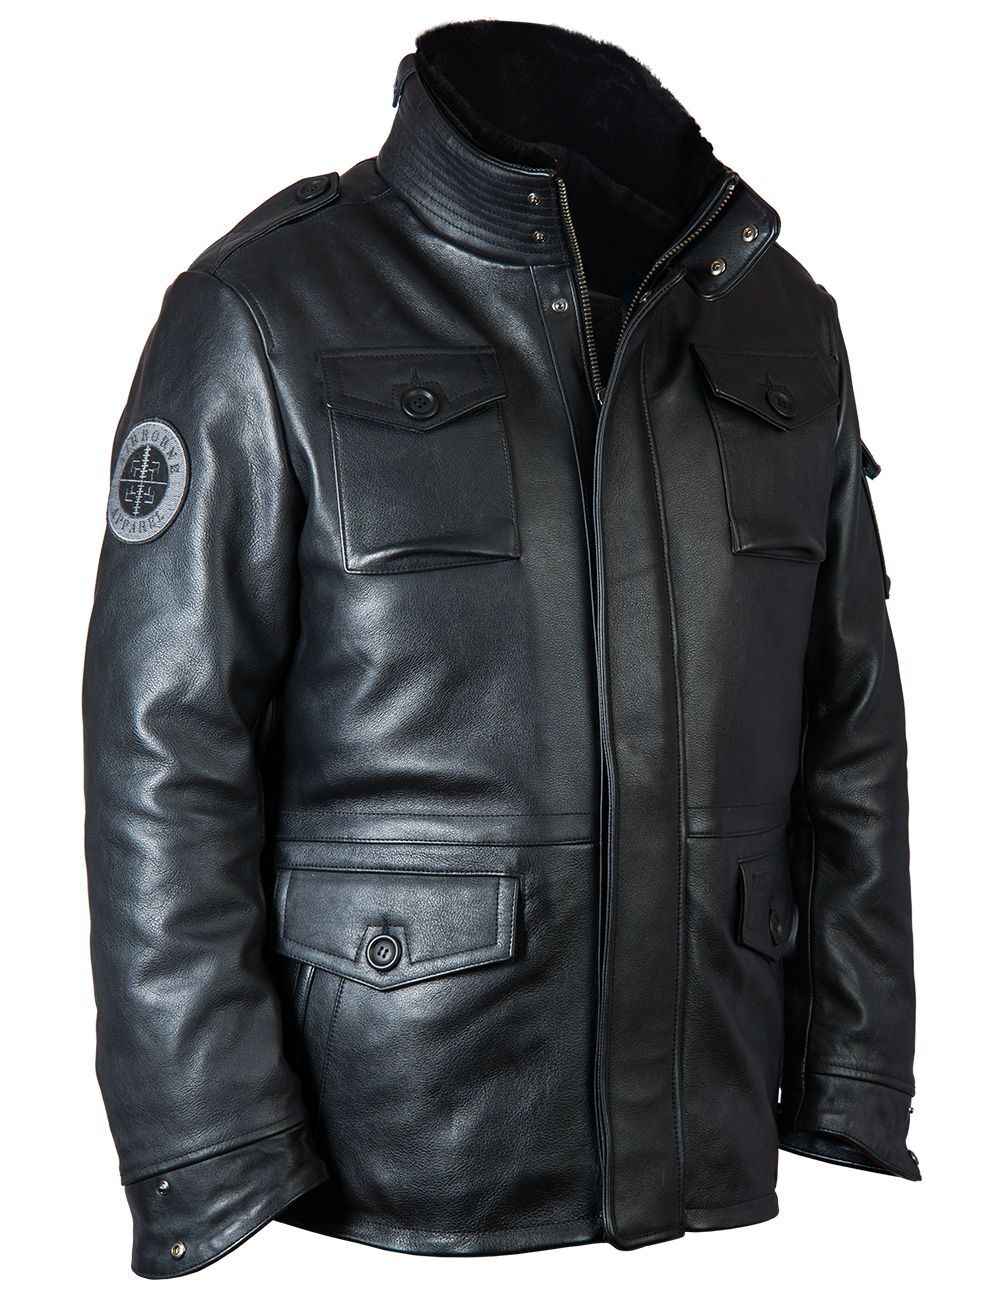 М65 SNIPER LEATHER JACKET WITH LINER BLACK